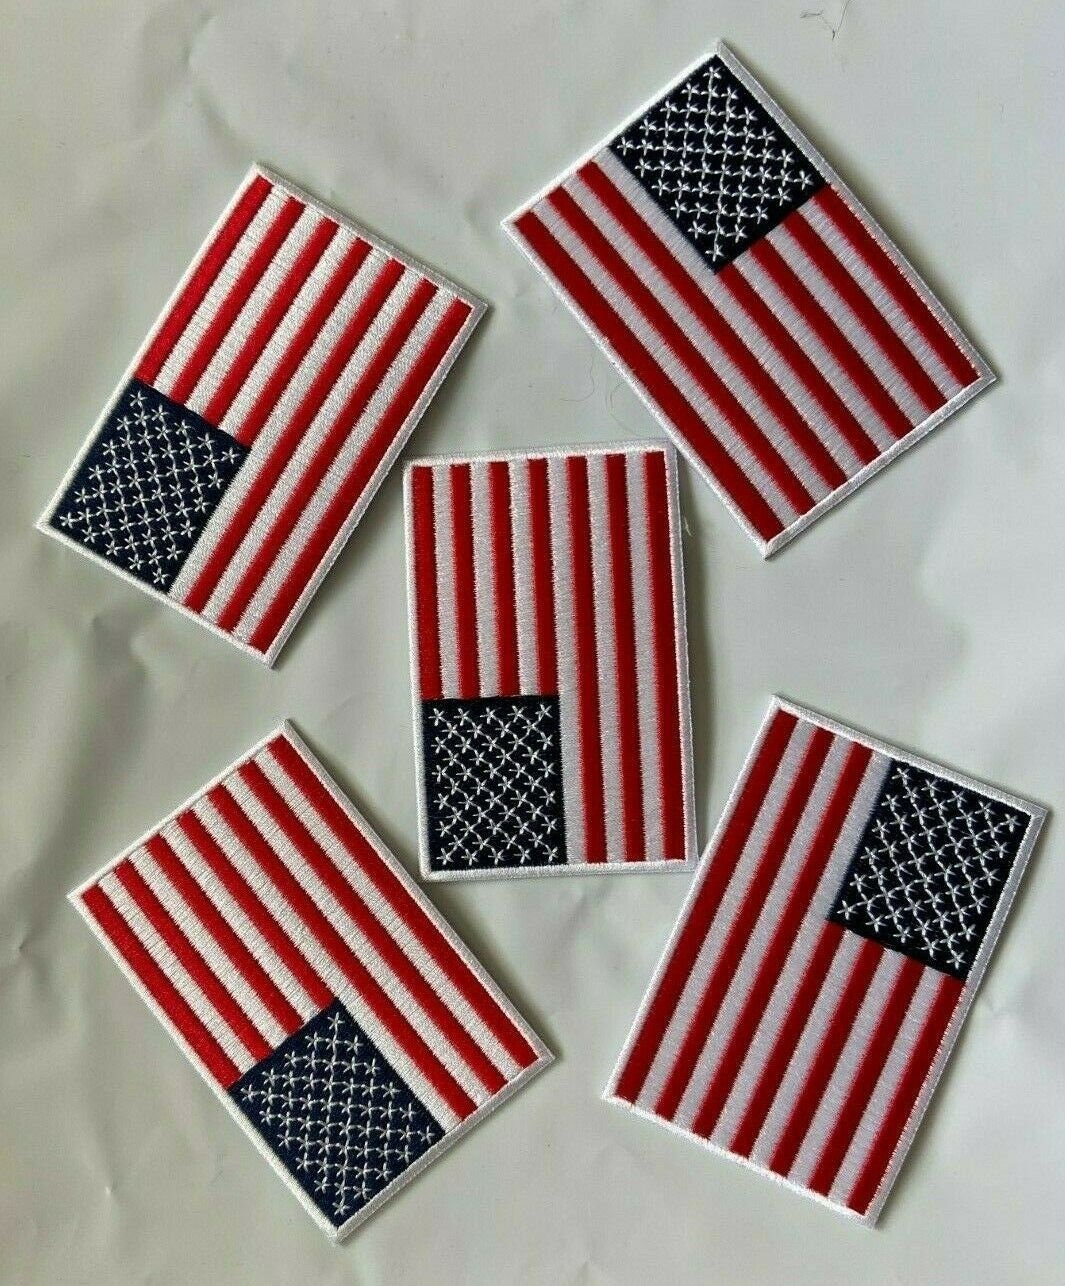 USA American Flag Embroidered Iron on Patch 5 Patches 2.25x3.5 